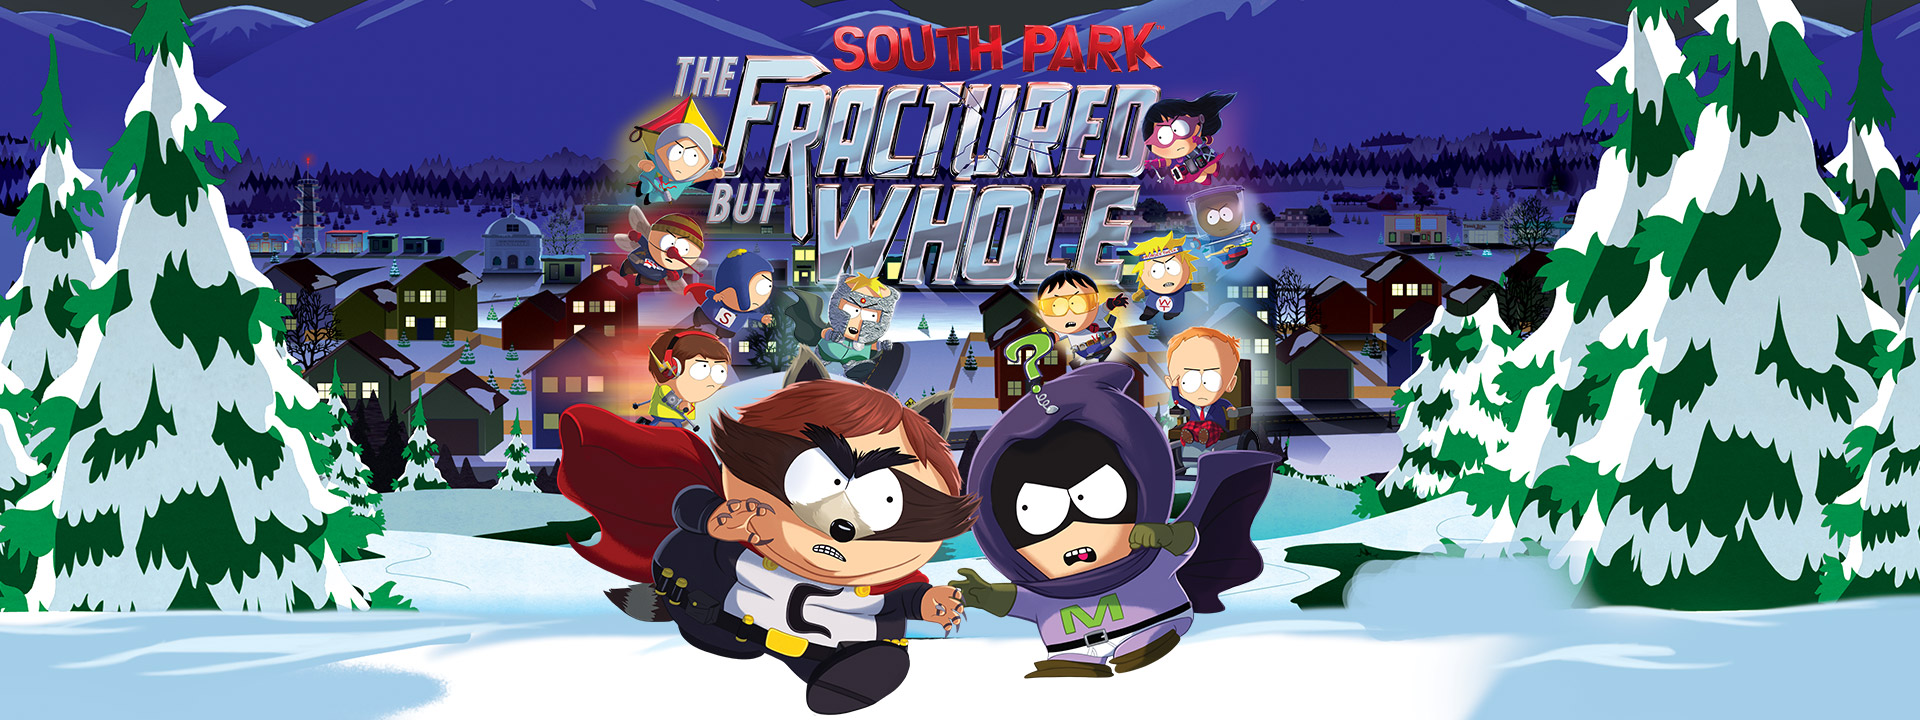 south park fractured but whole gender dialogue